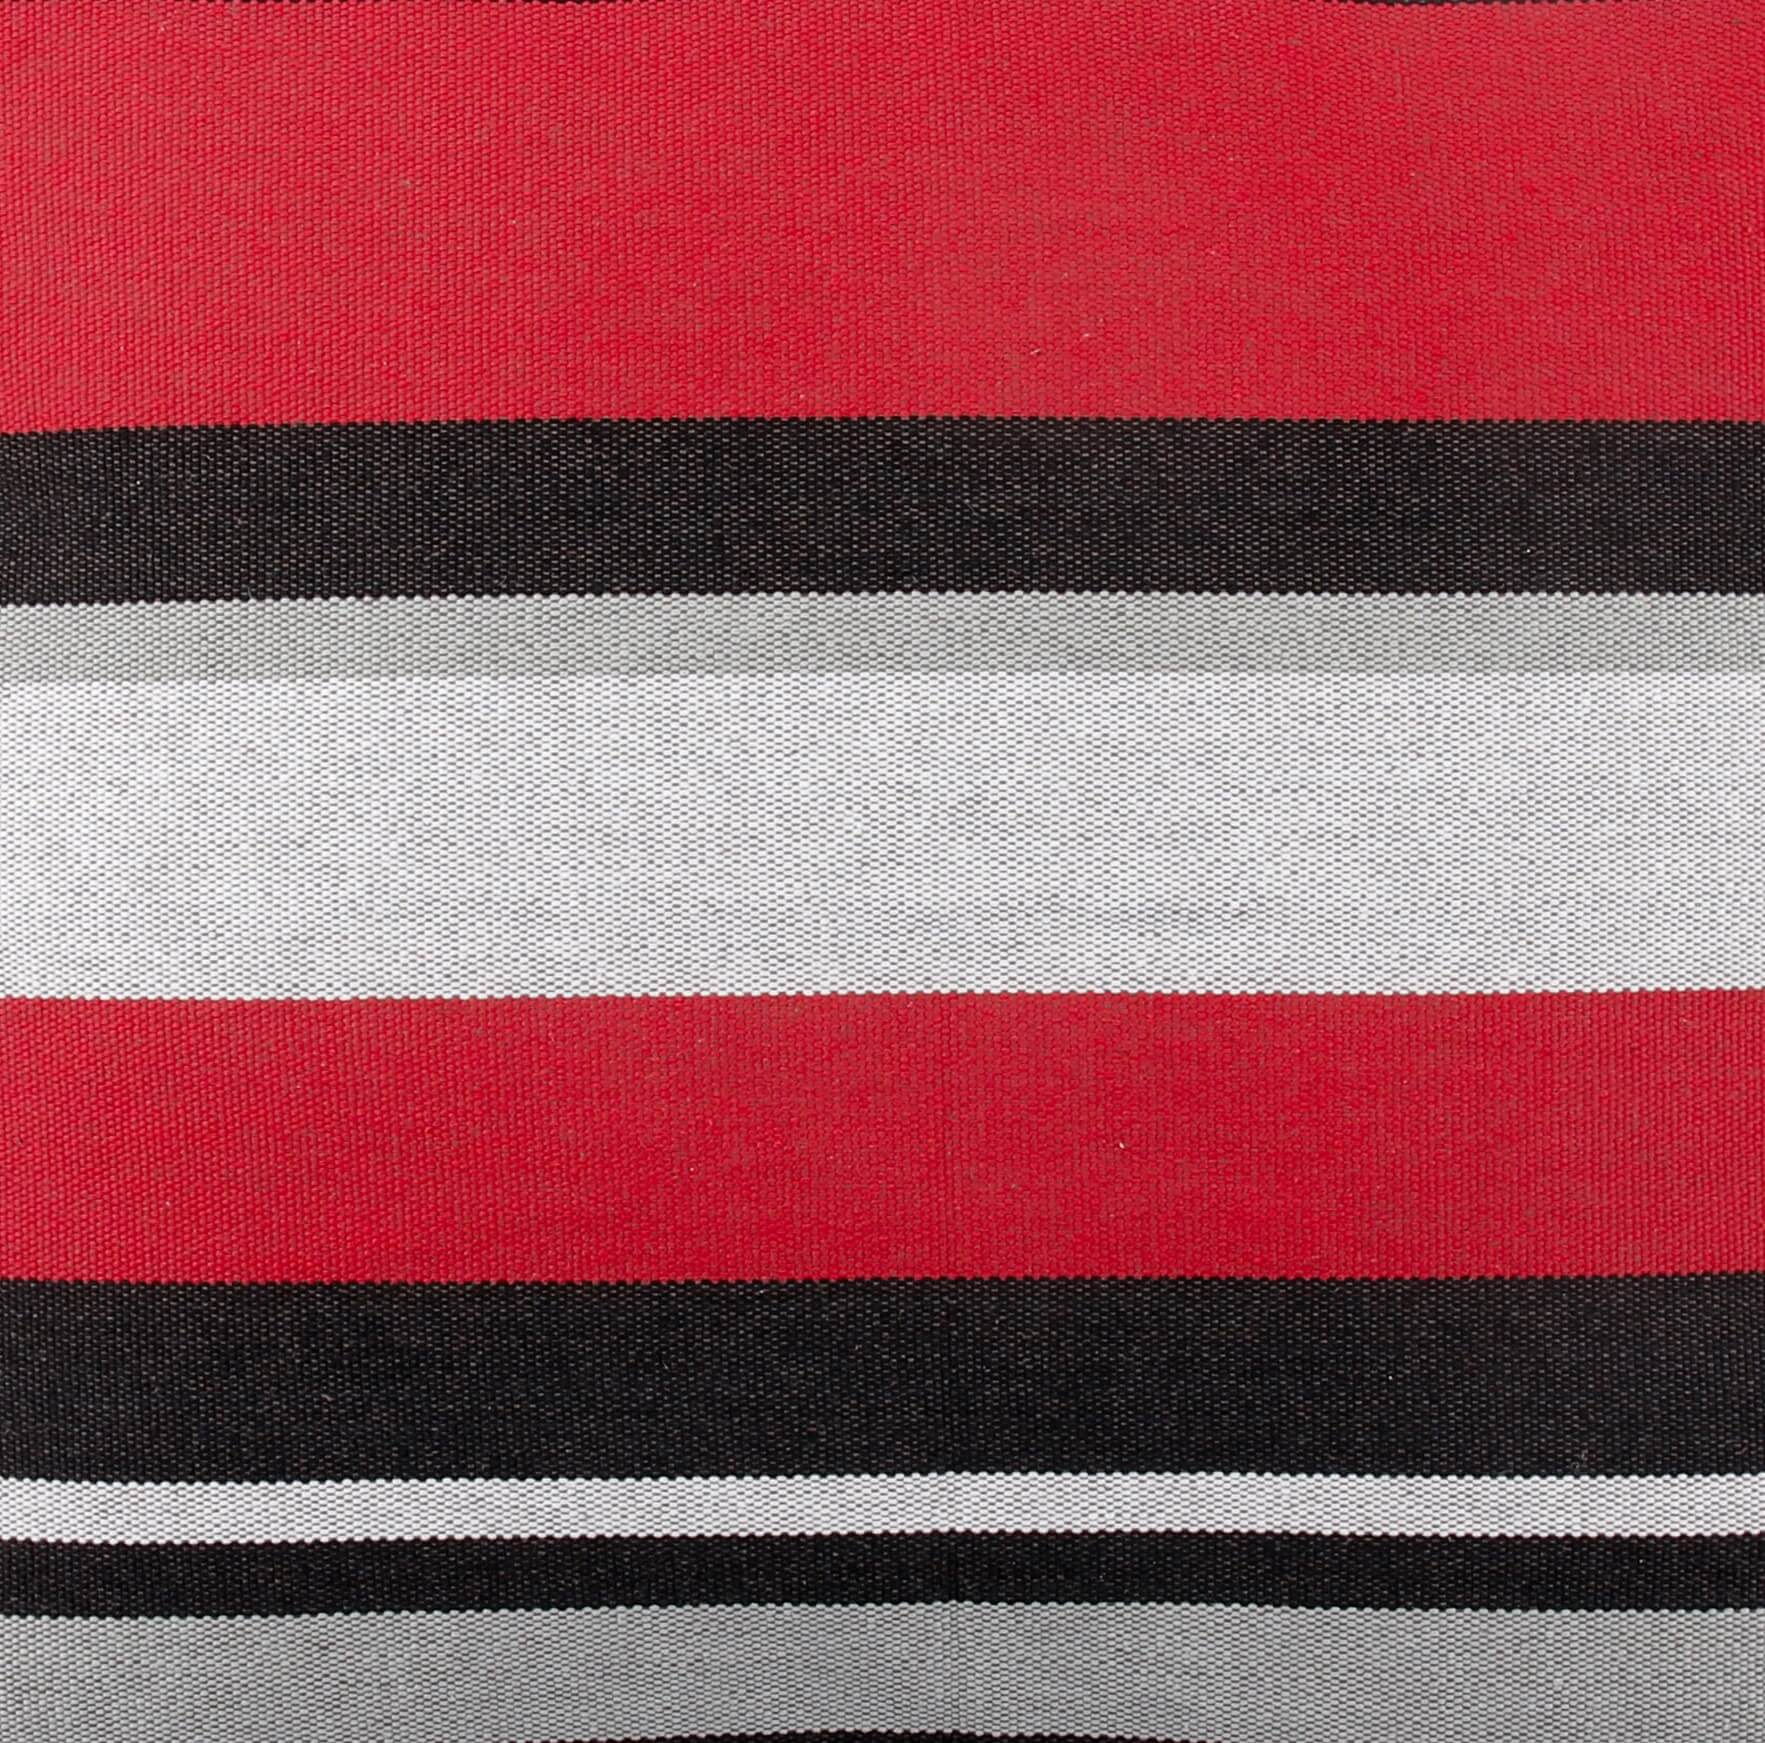 Ohio state buckeyes scarlet and gray fabric